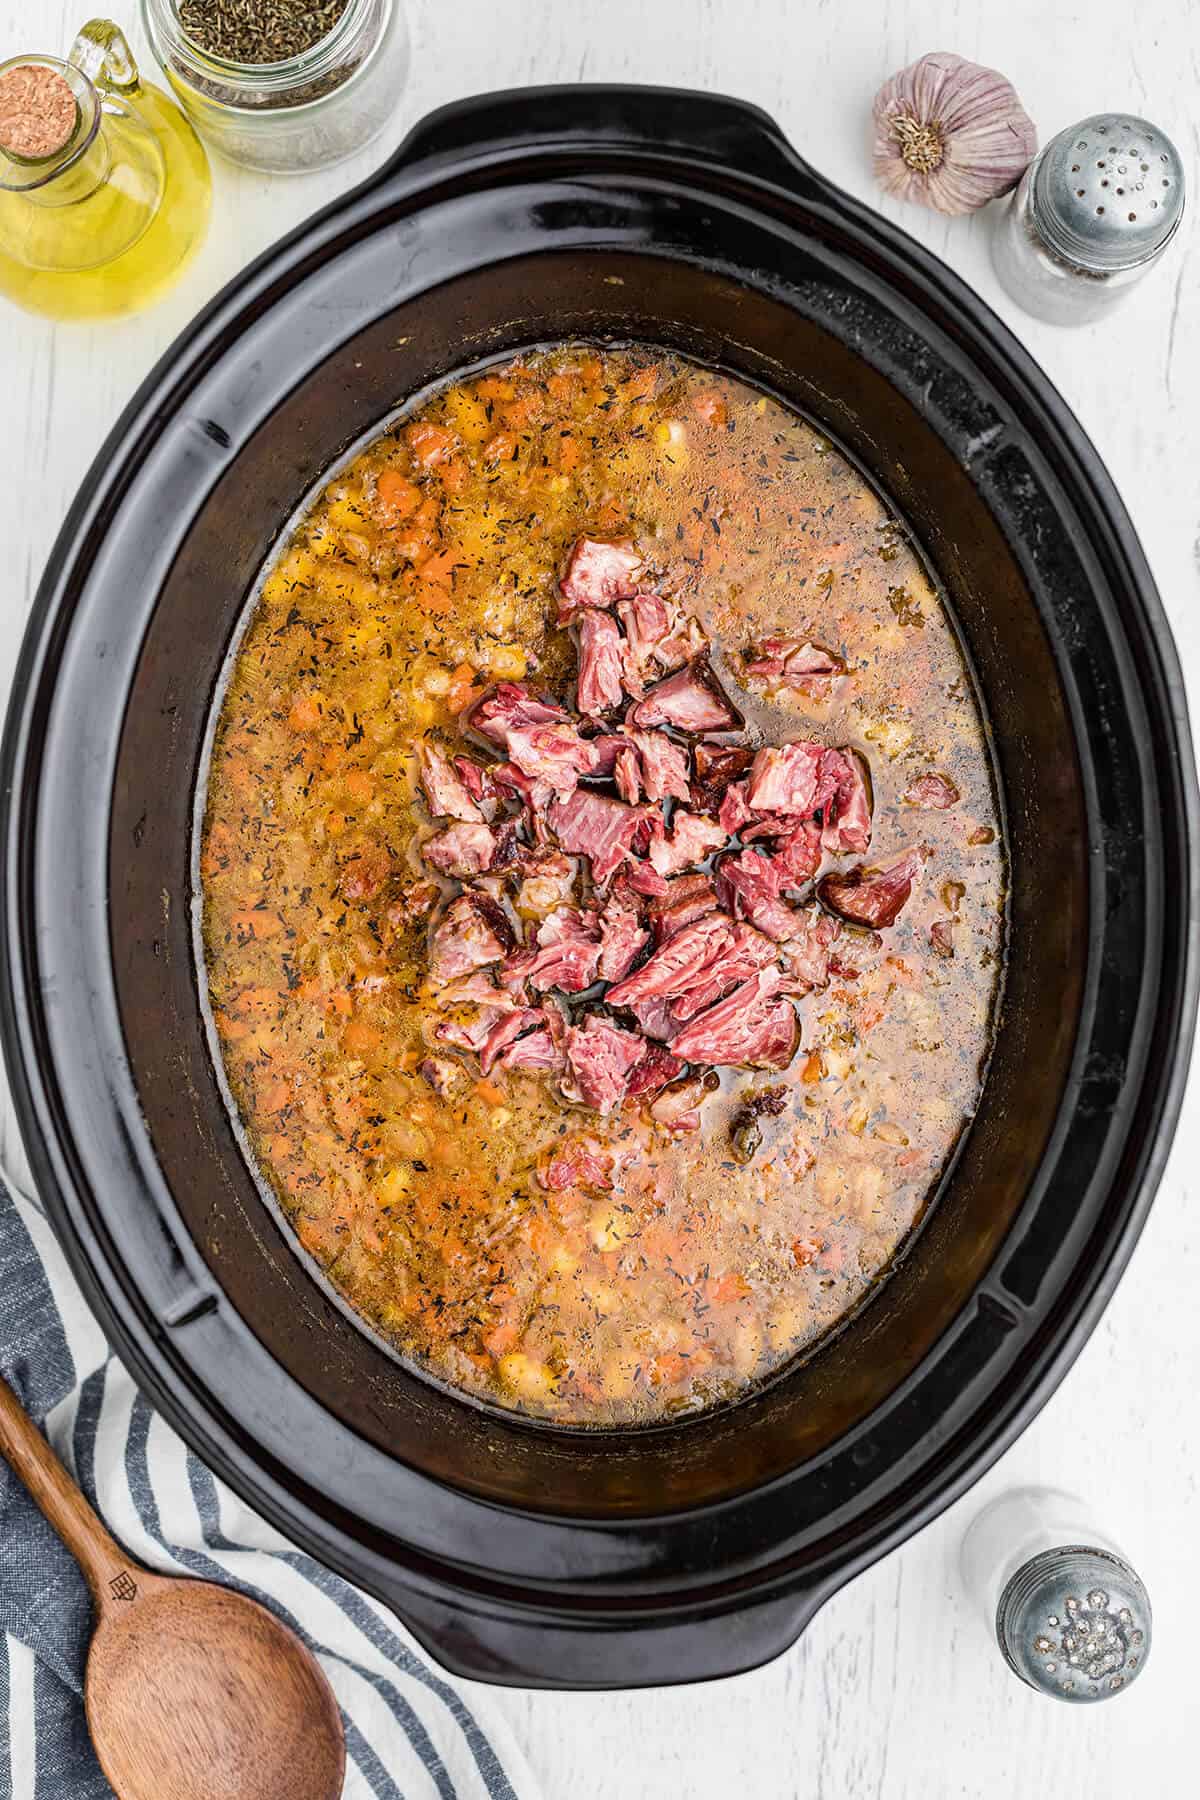 Meat from ham hocks added back to slow cooker.